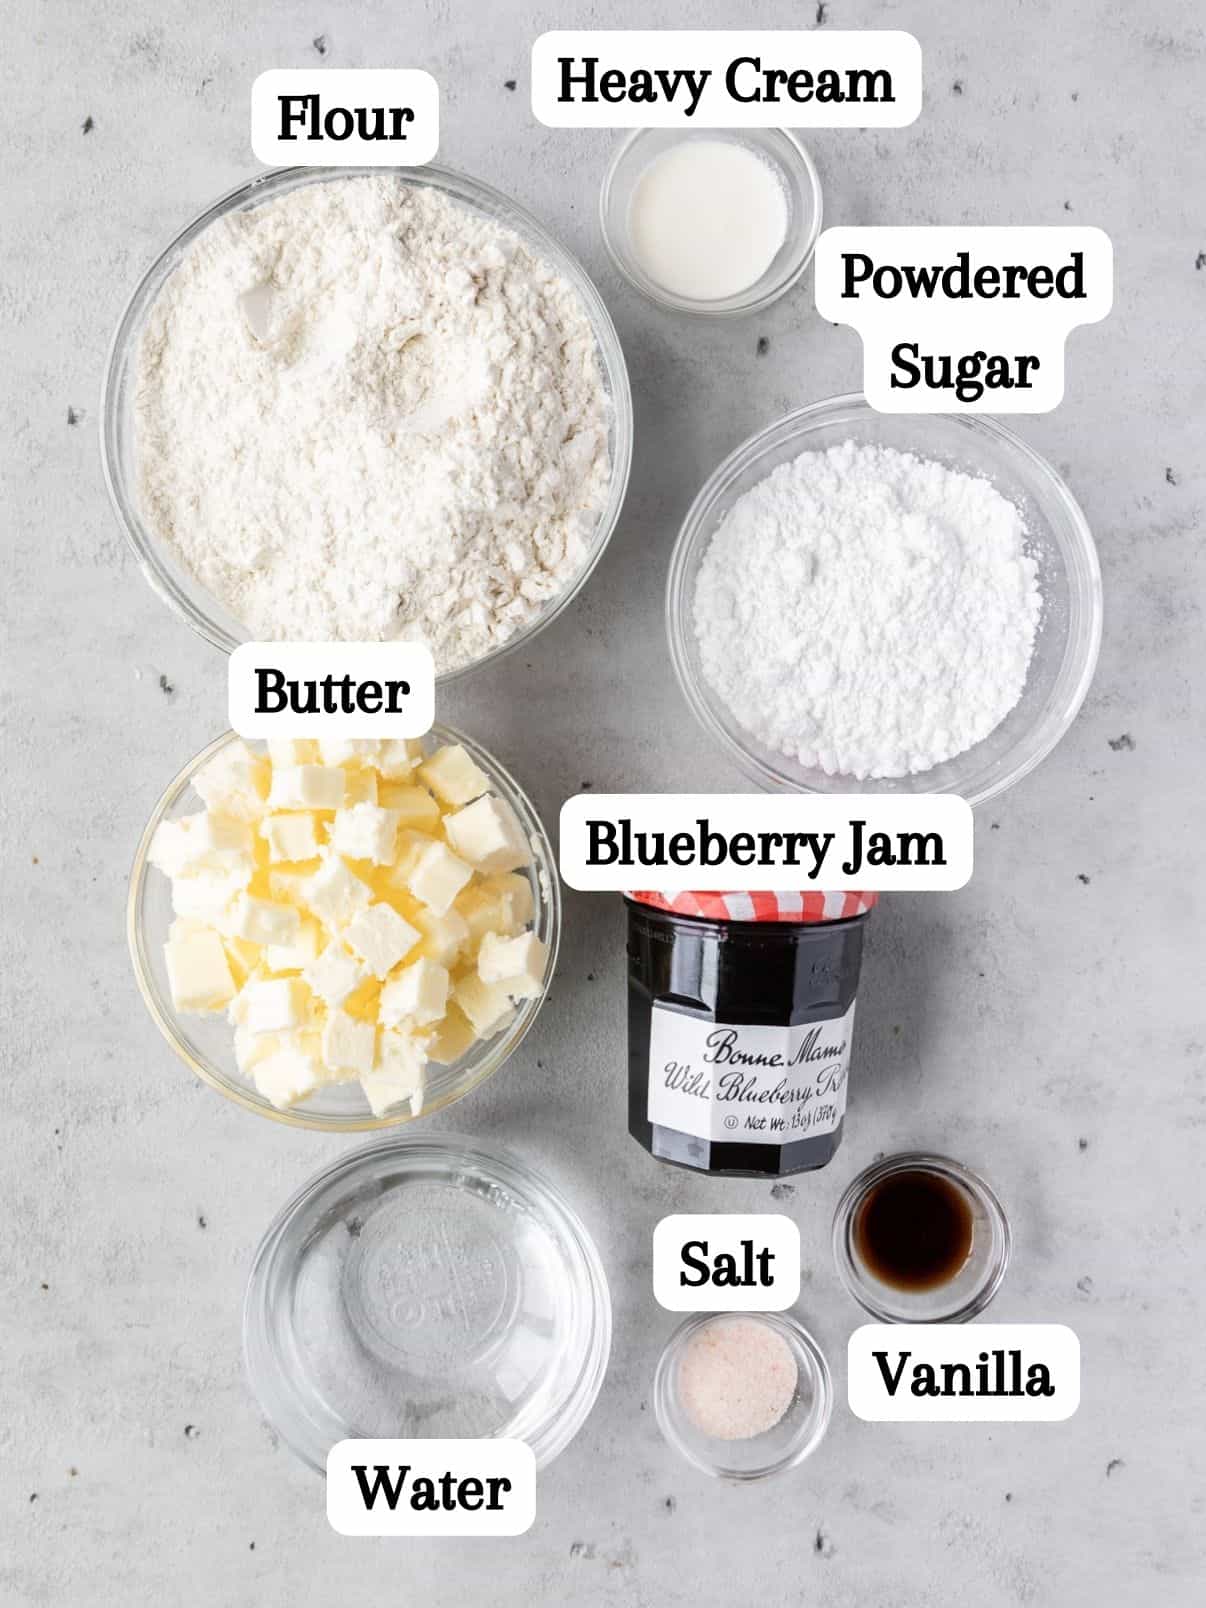 all of the ingredients laid out and labeled on a grey background.